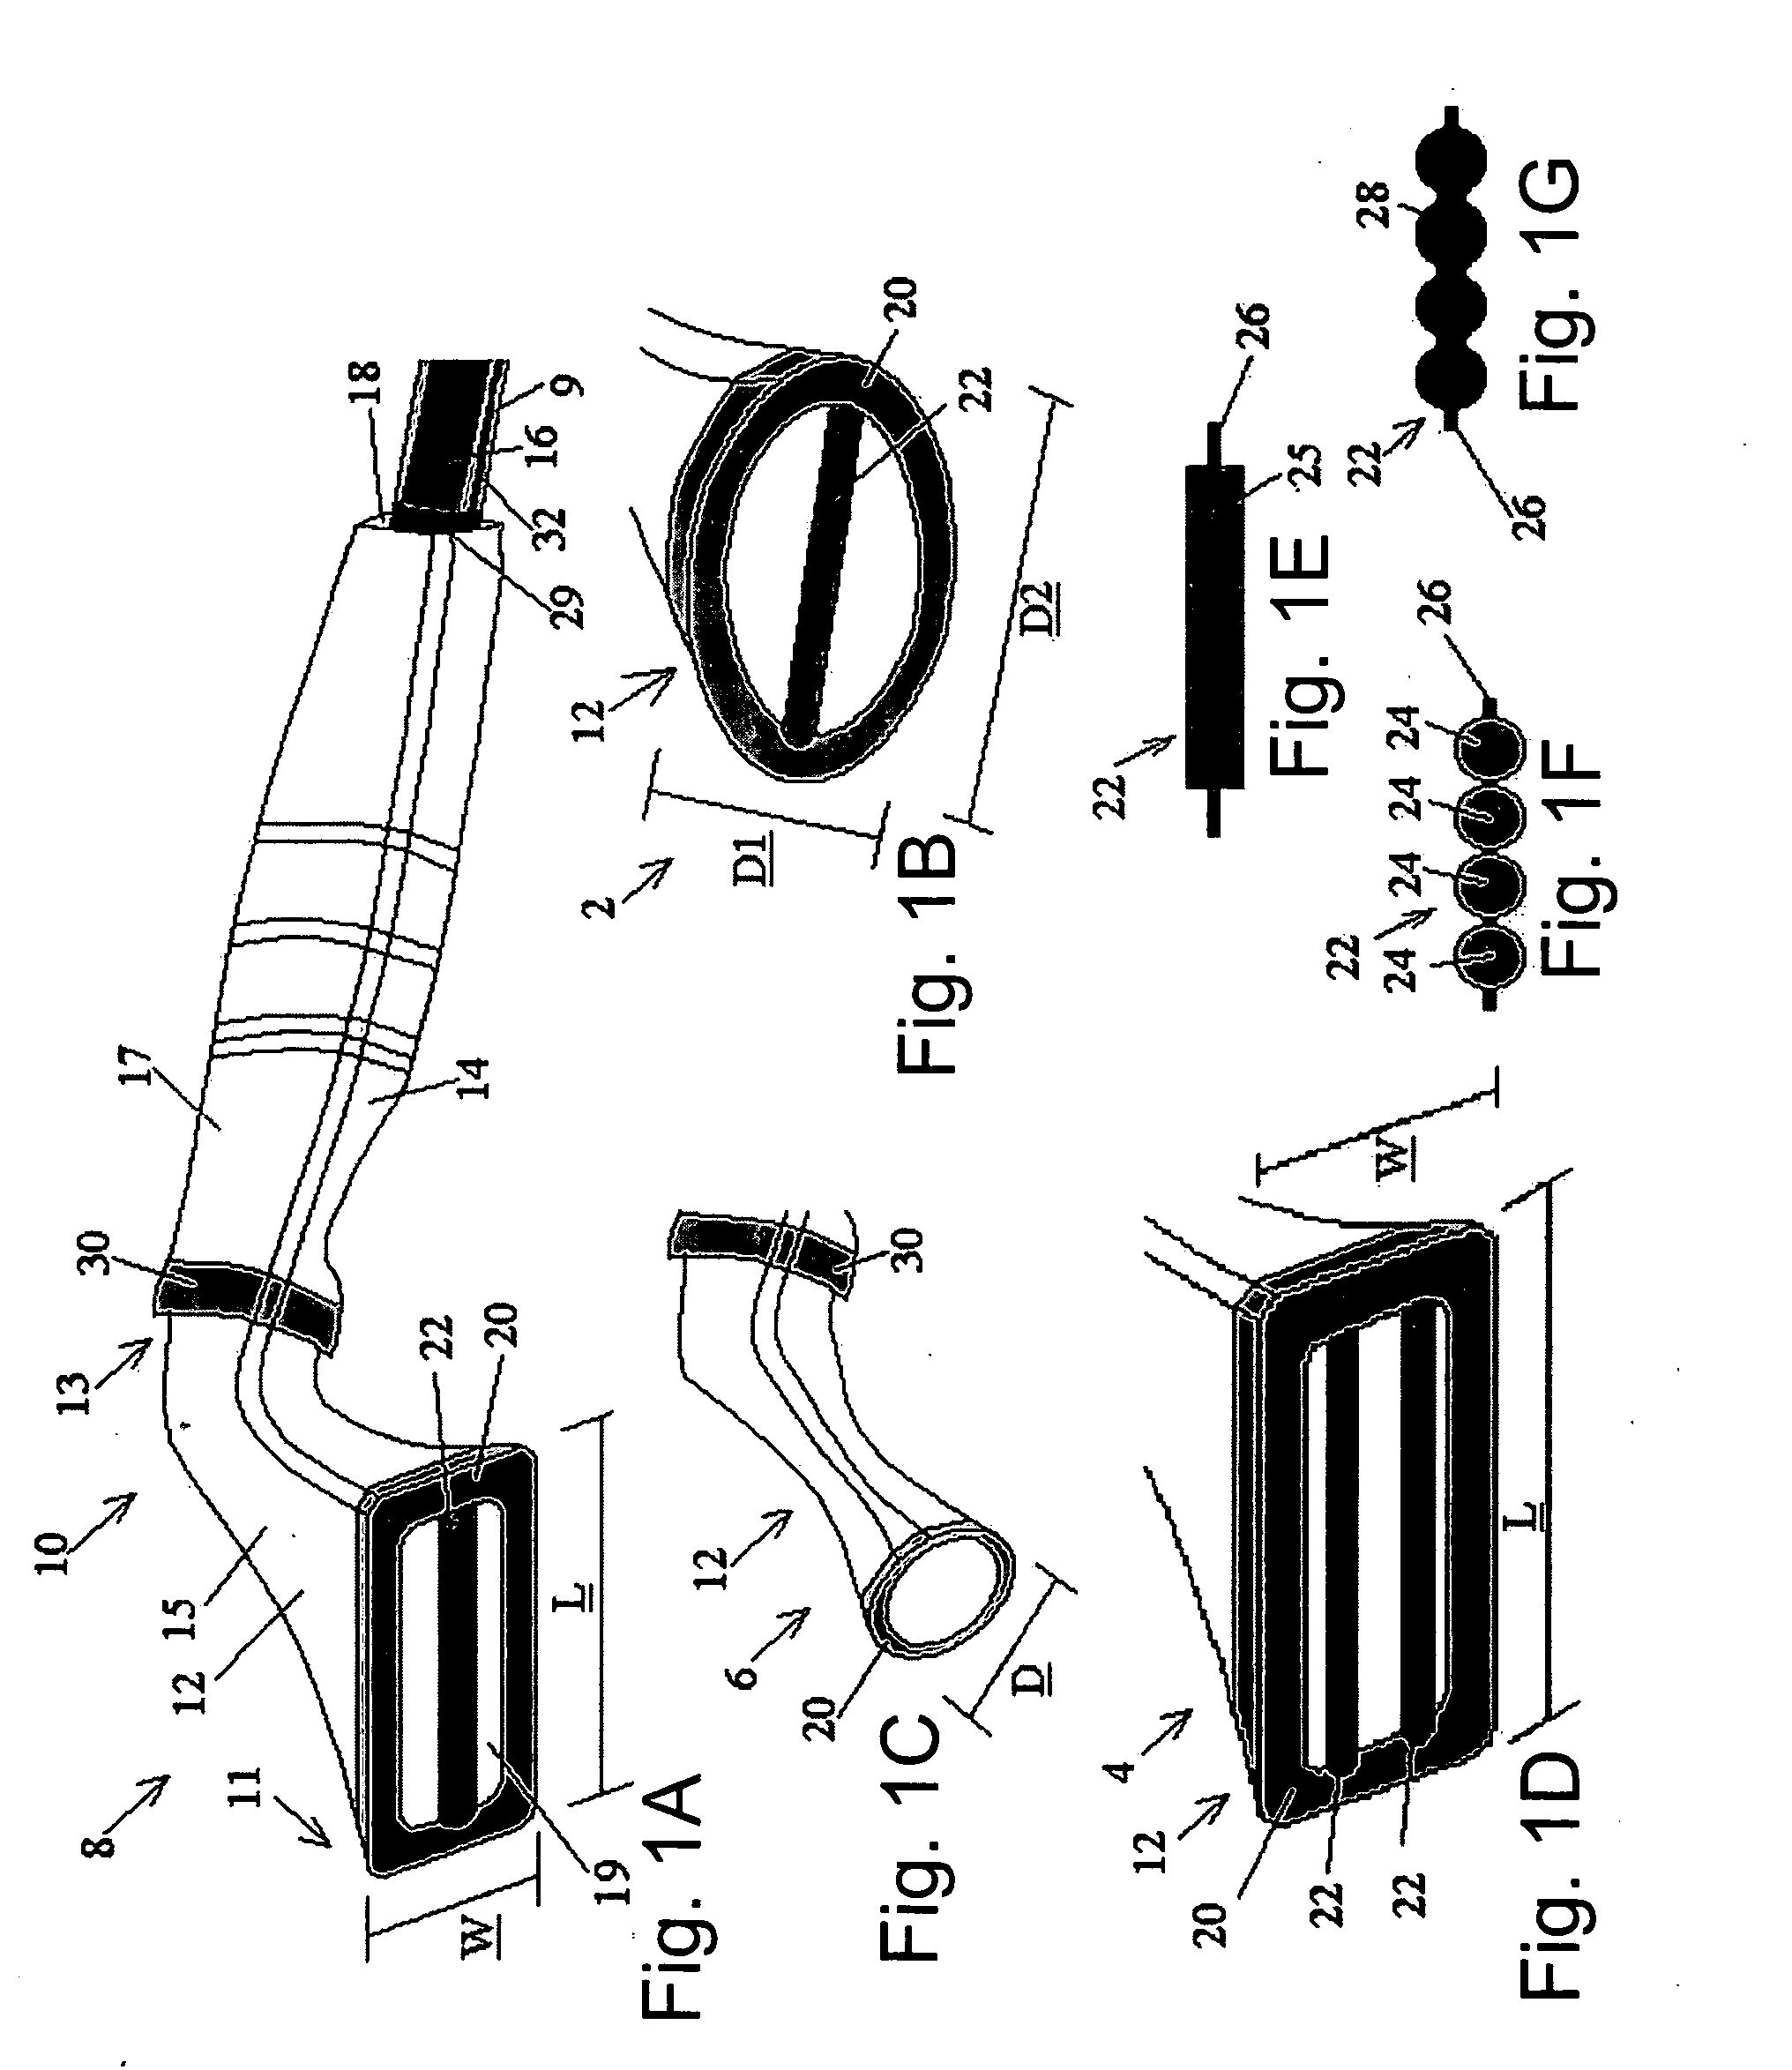 System and method for face and body treatment